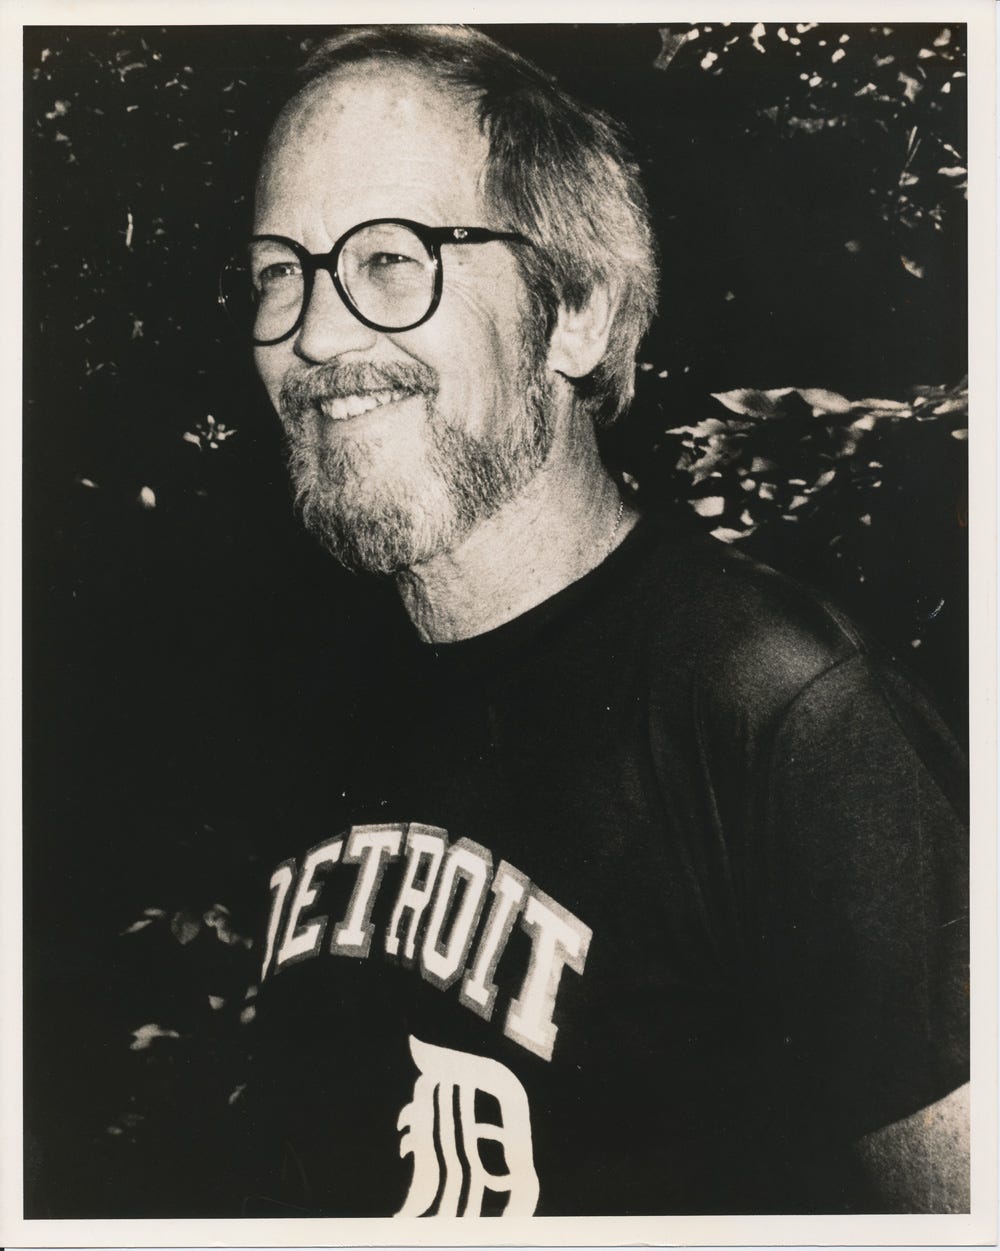 A portrait of Elmore Leonard wearing glasses and a Detroit t-shirt, probably taken around the 1980s